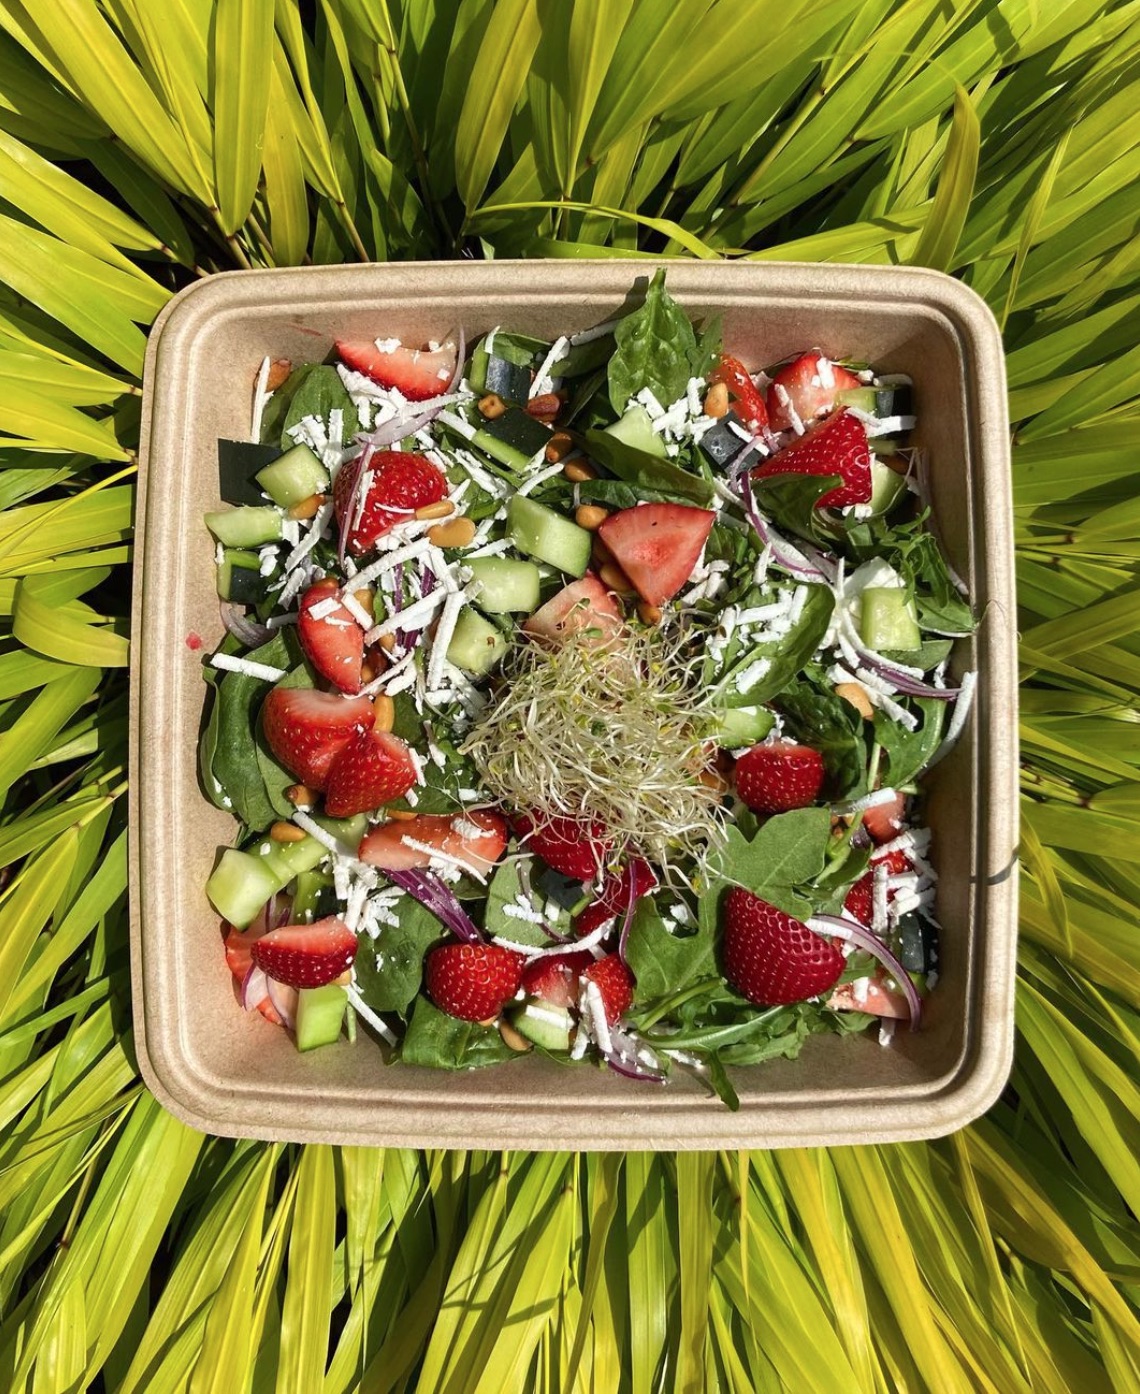 A summer salad from Montauk's Naturally Good Foods + Cafe